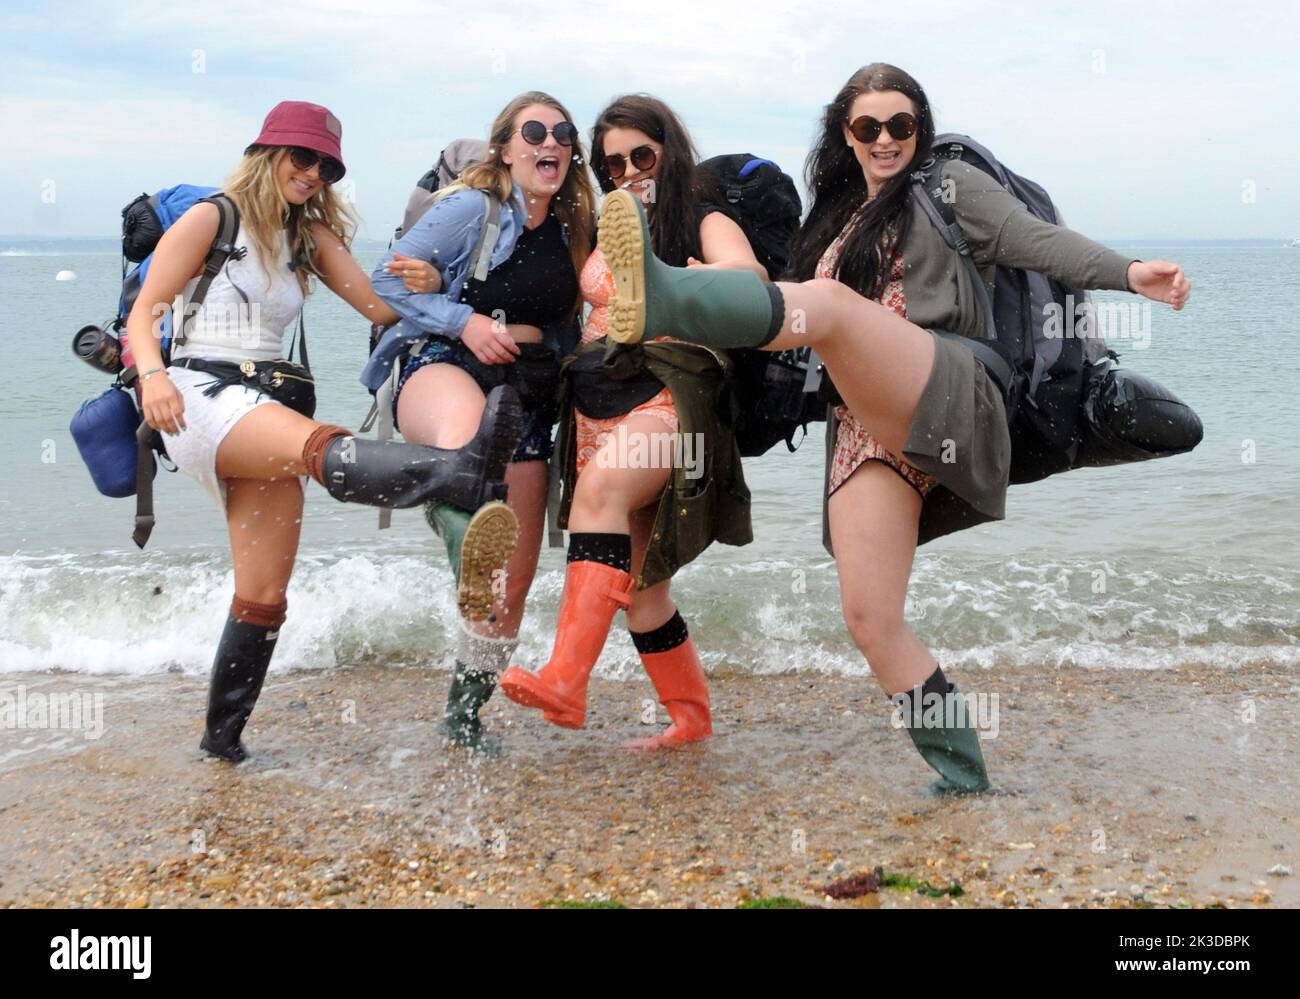 Hi jinks for music fans on the beach at Southsea  left to right, Megan Tiltman, Maddie, Presdee, Becky Martin and Grace |Harris as they wait for the Isle of Wight hovercraft to take them to tne Isle of Wight Music Festival, Pic Mike Walker, Mike Walker Pictures,2015 Stock Photo